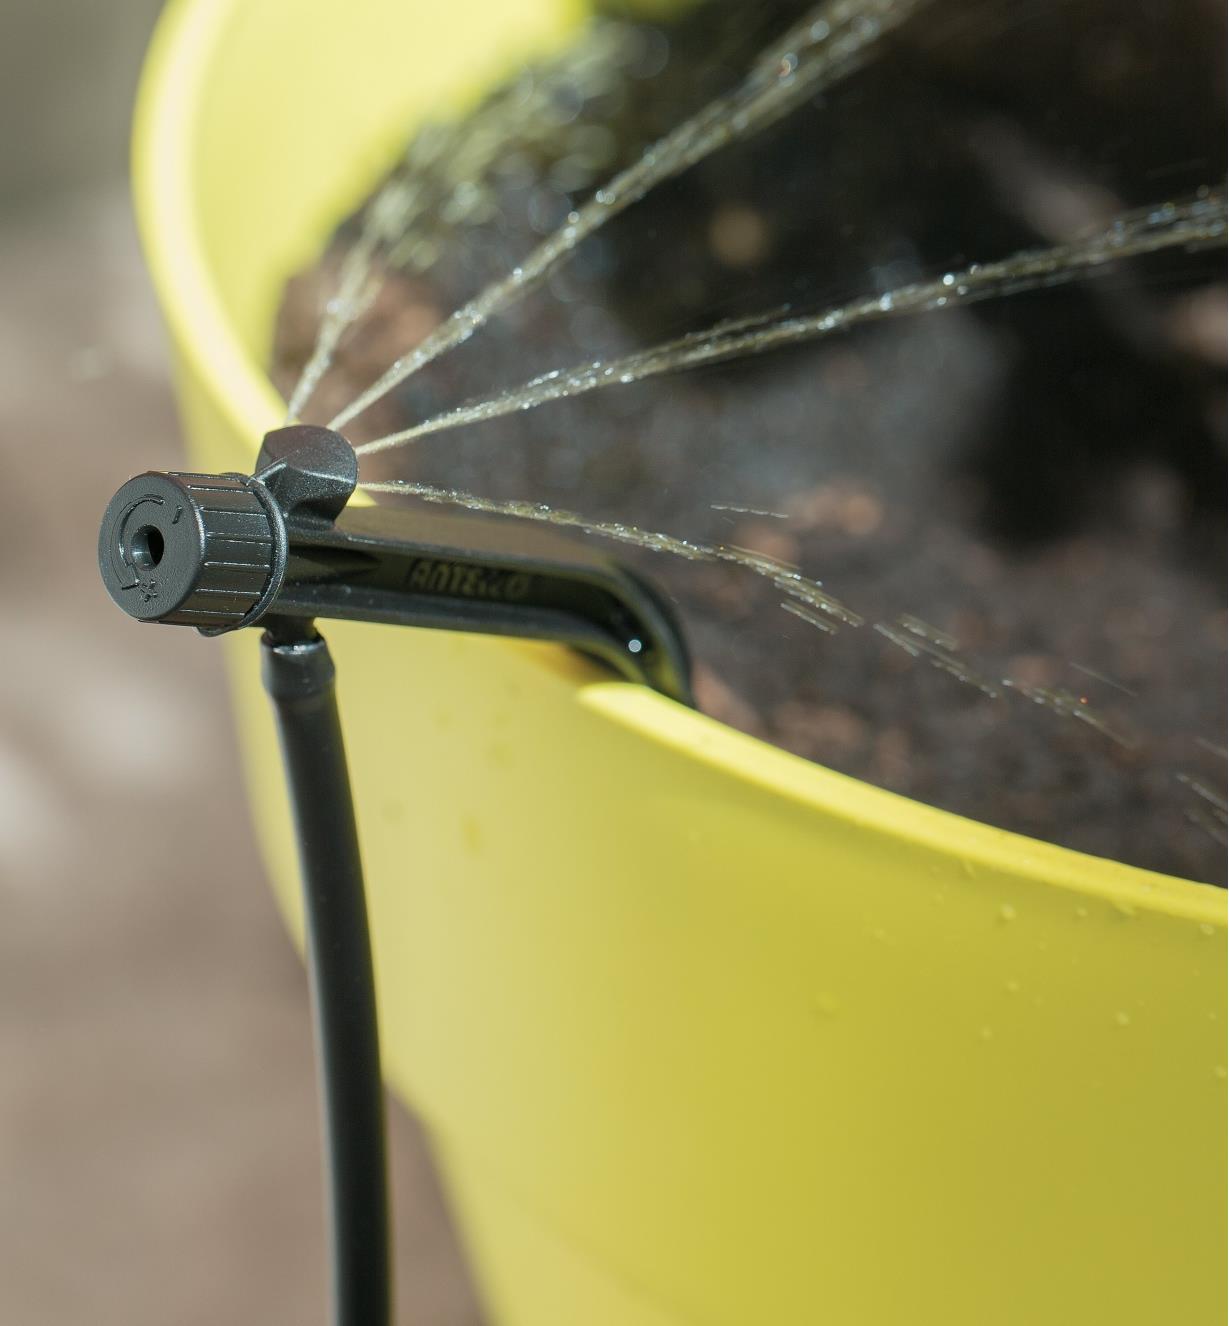 Potstream Emitter attached to the edge of a pot, emitting water